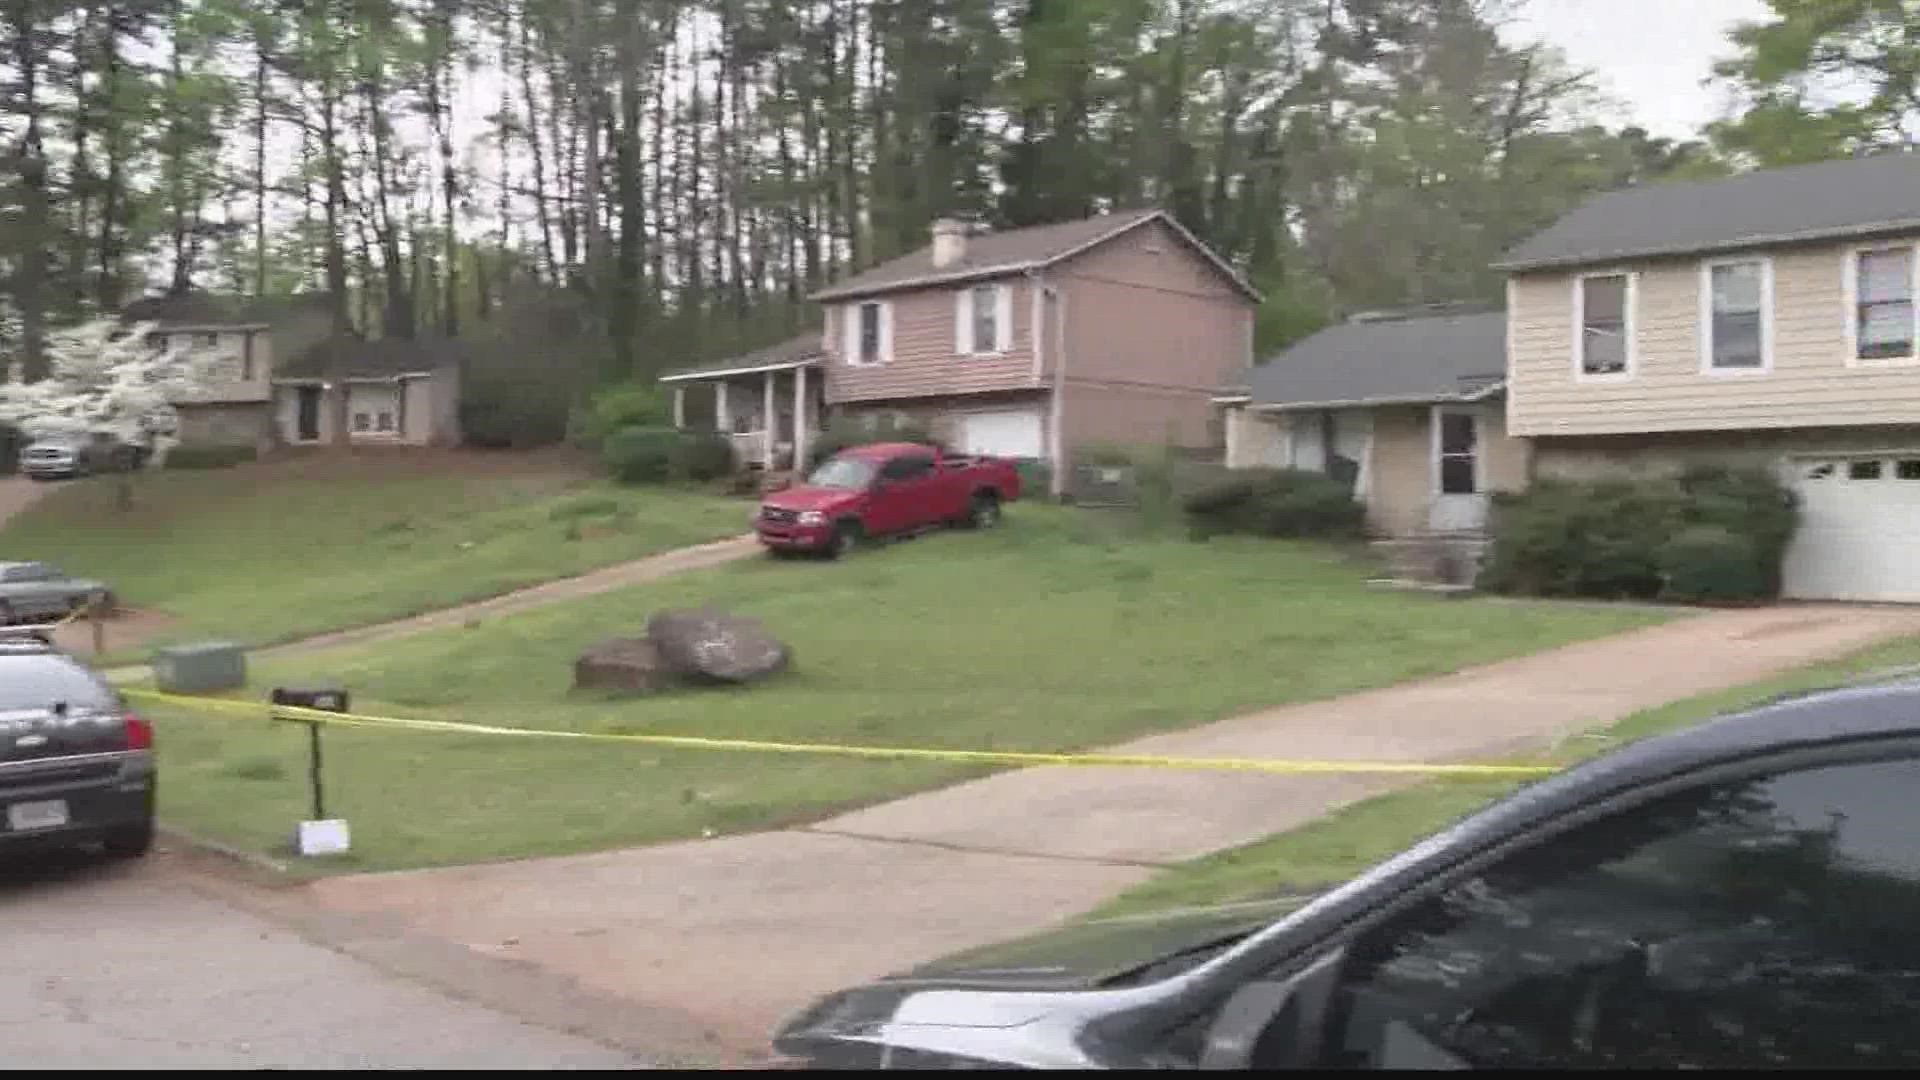 A 6-year-old boy is dead after what police say was an accidental shooting in a DeKalb County neighborhood Friday.